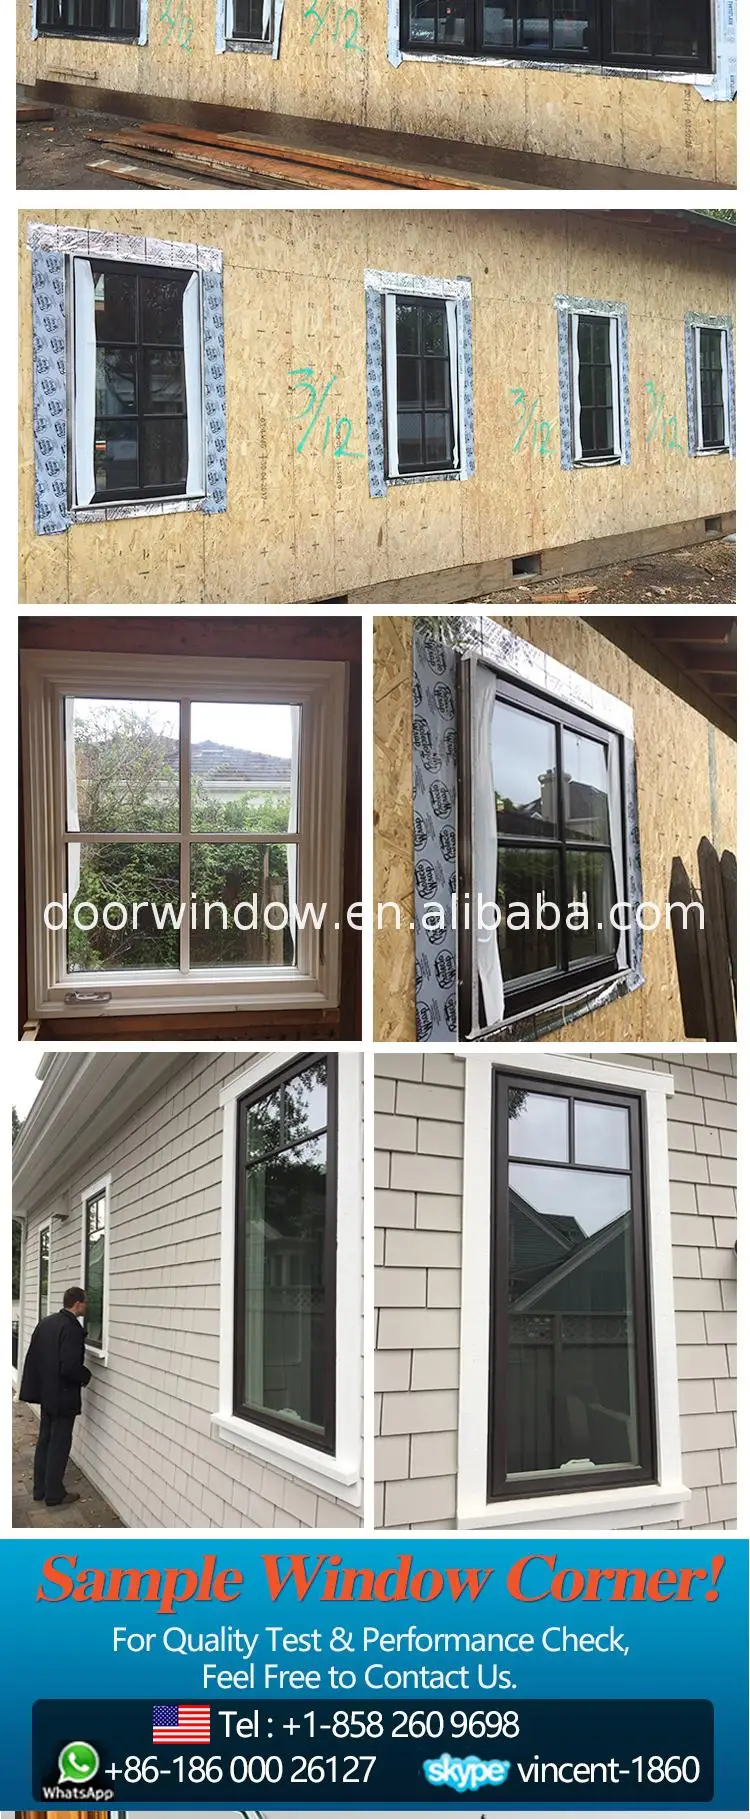 Windows model in house window grill design crank out security